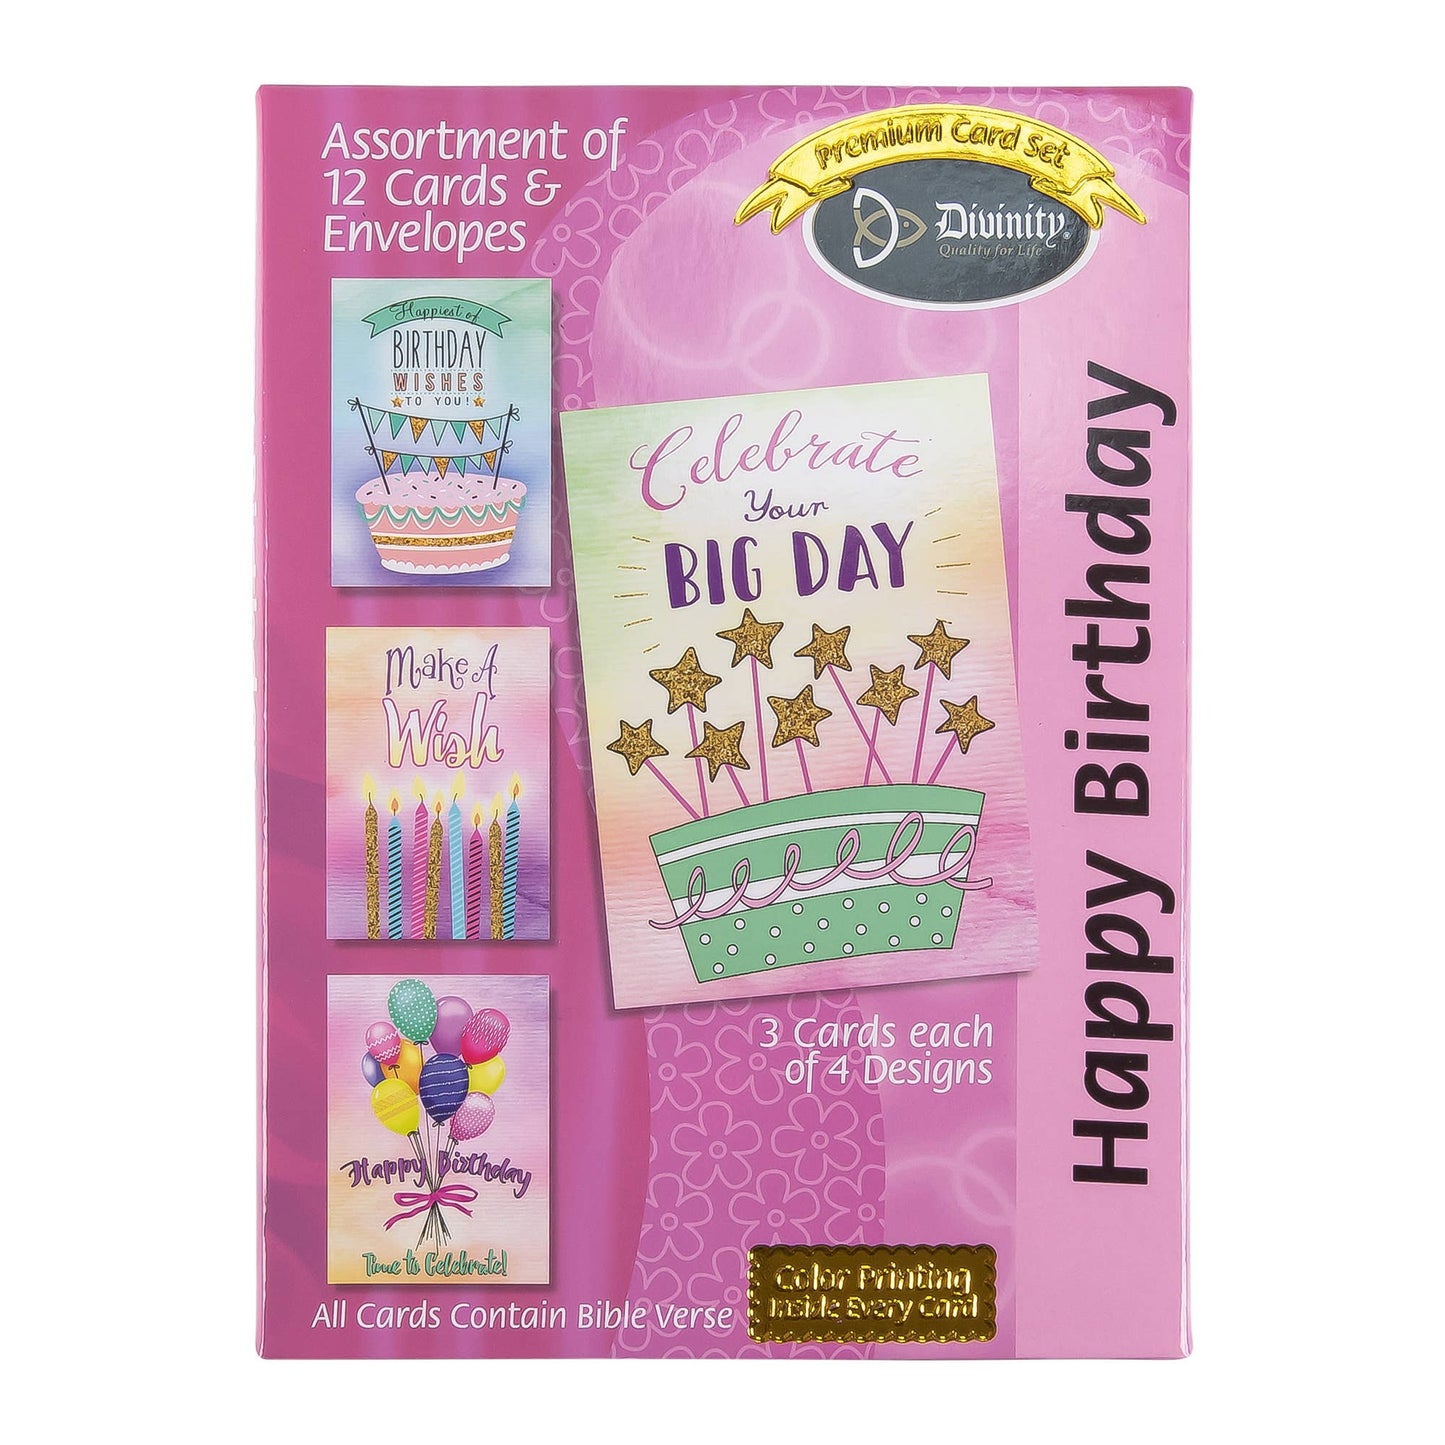 Divinity Boutique - Boxed Cards: Happy Birthday, Wishes, Big Day, Make a Wish